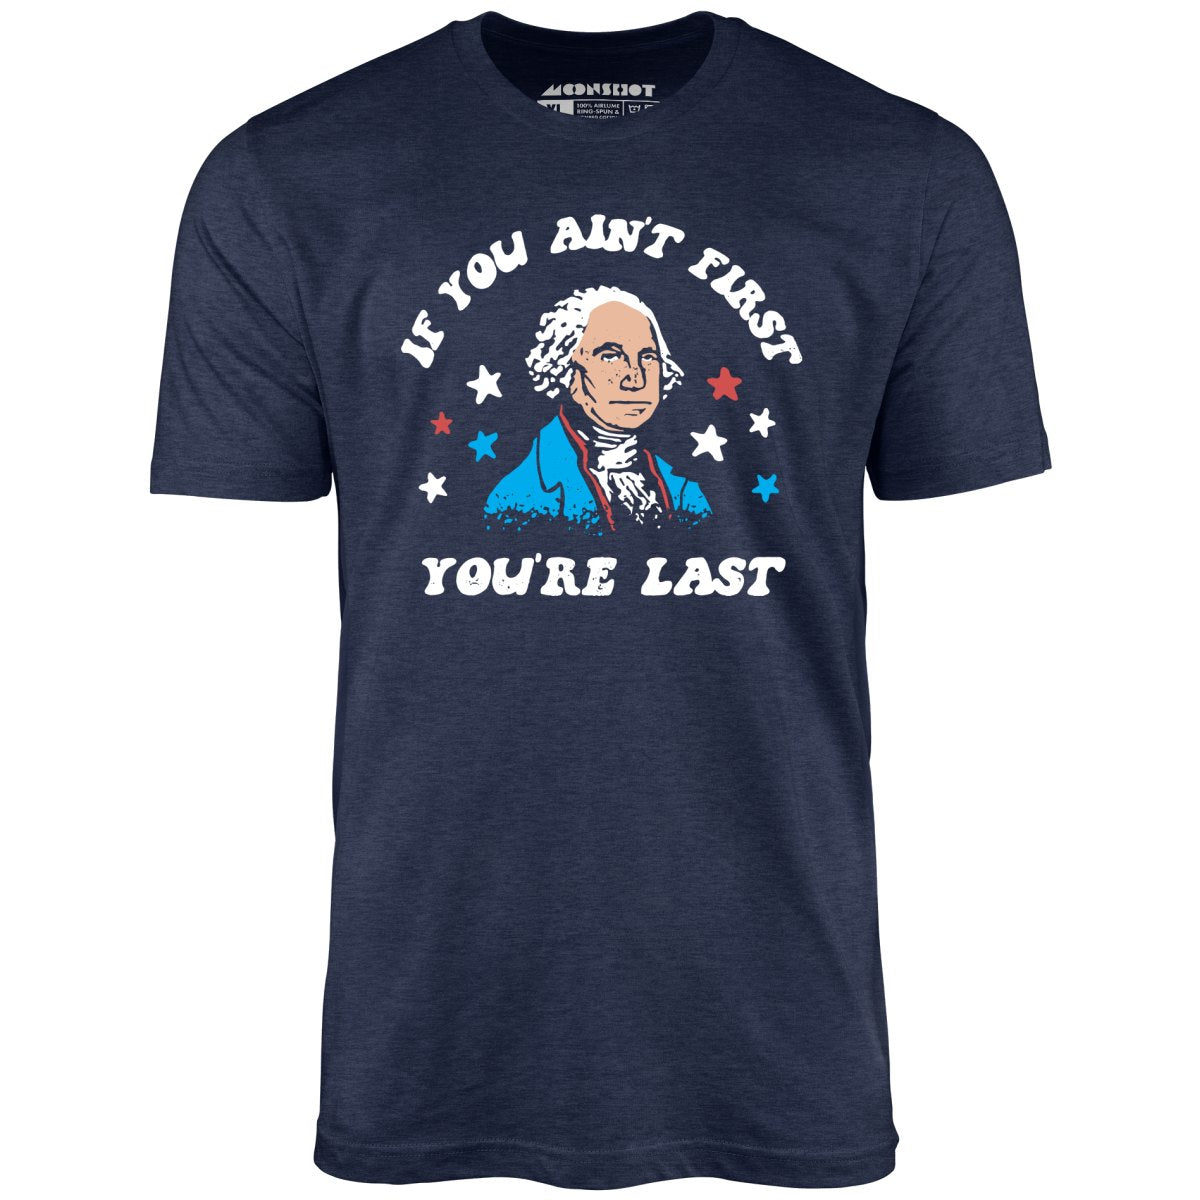 If You Ain't First You're Last - Unisex T-Shirt